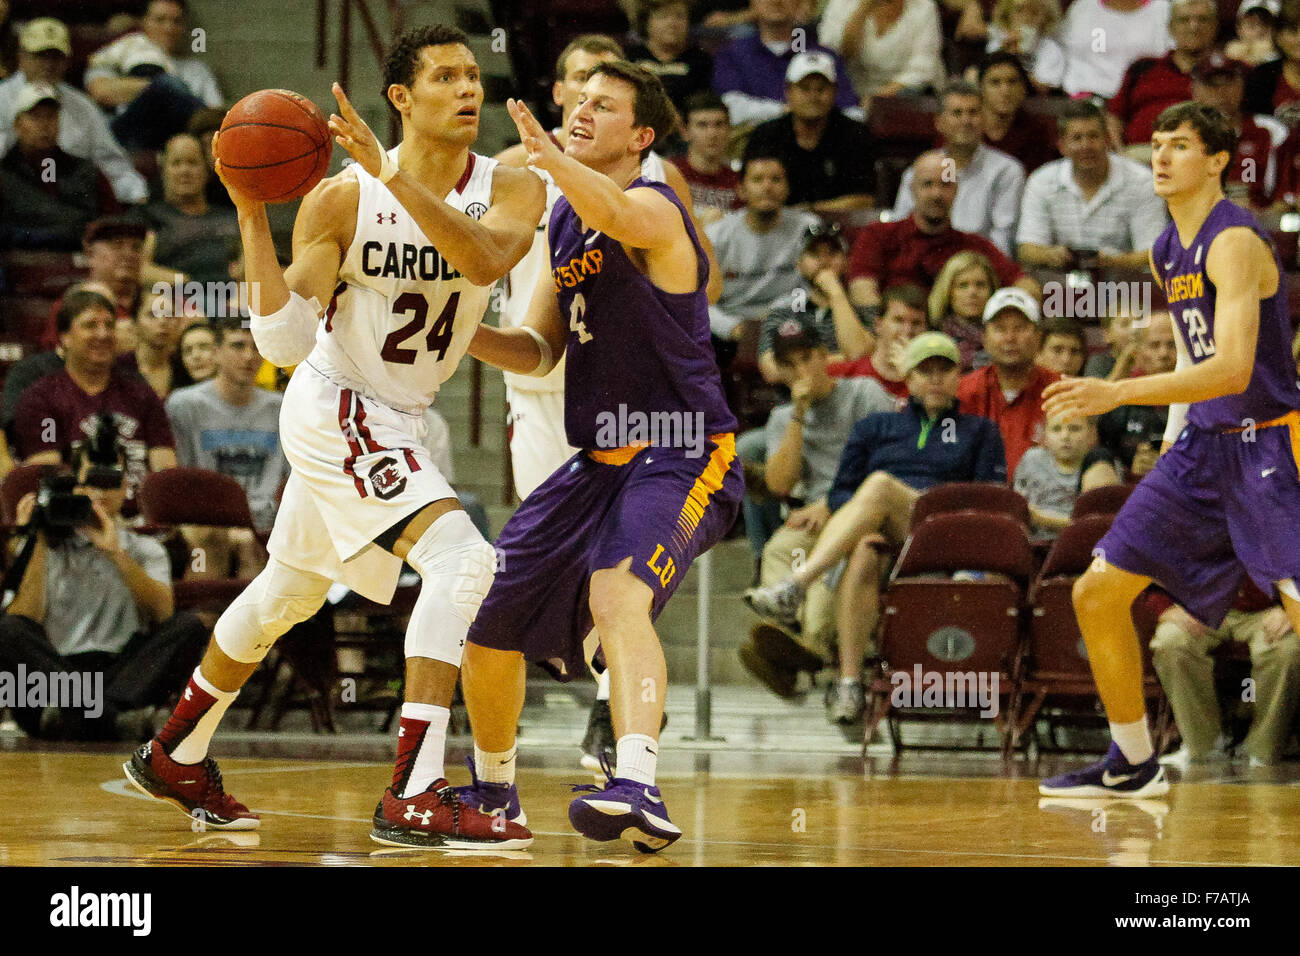 Columbia, SC, USA. 27th Nov, 2015. Michael Carrera (24) of the South Carolina Gamecocks looks to pass under pressure from Garrison Mathews (14) of the Lipscomb Bisons in the NCAA Basketball match-up between the Lipscomb Bisons and the South Carolina Gamecocks at Colonial Life Arena in Columbia, SC. Scott Kinser/CSM/Alamy Live News Stock Photo